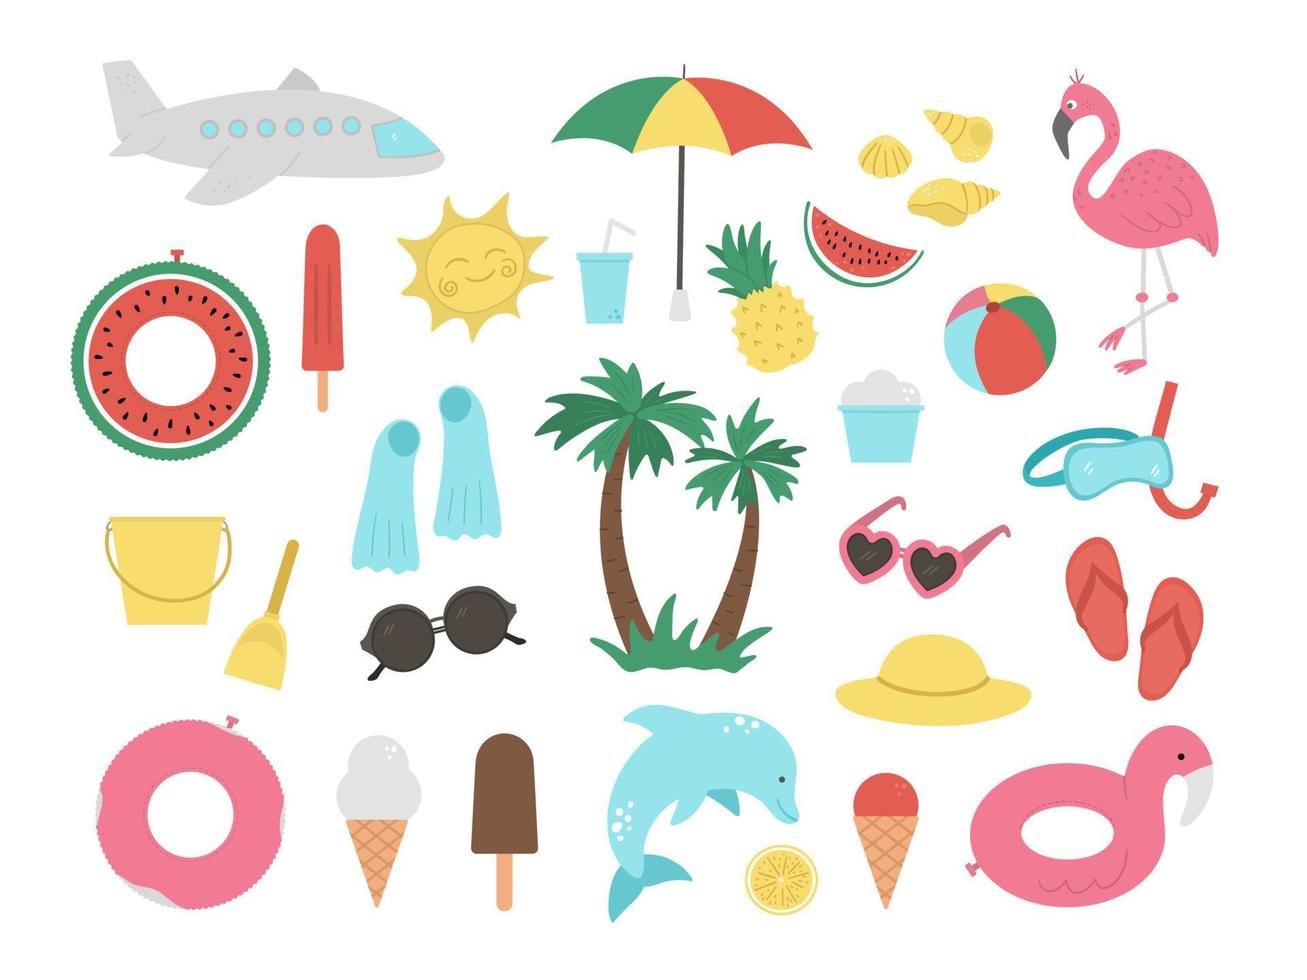 Vector set of summer clipart elements isolated on white background. Cute flat illustration for kids with palm tree, plane, sunglasses, funny inflatable rings. Vacation beach objects